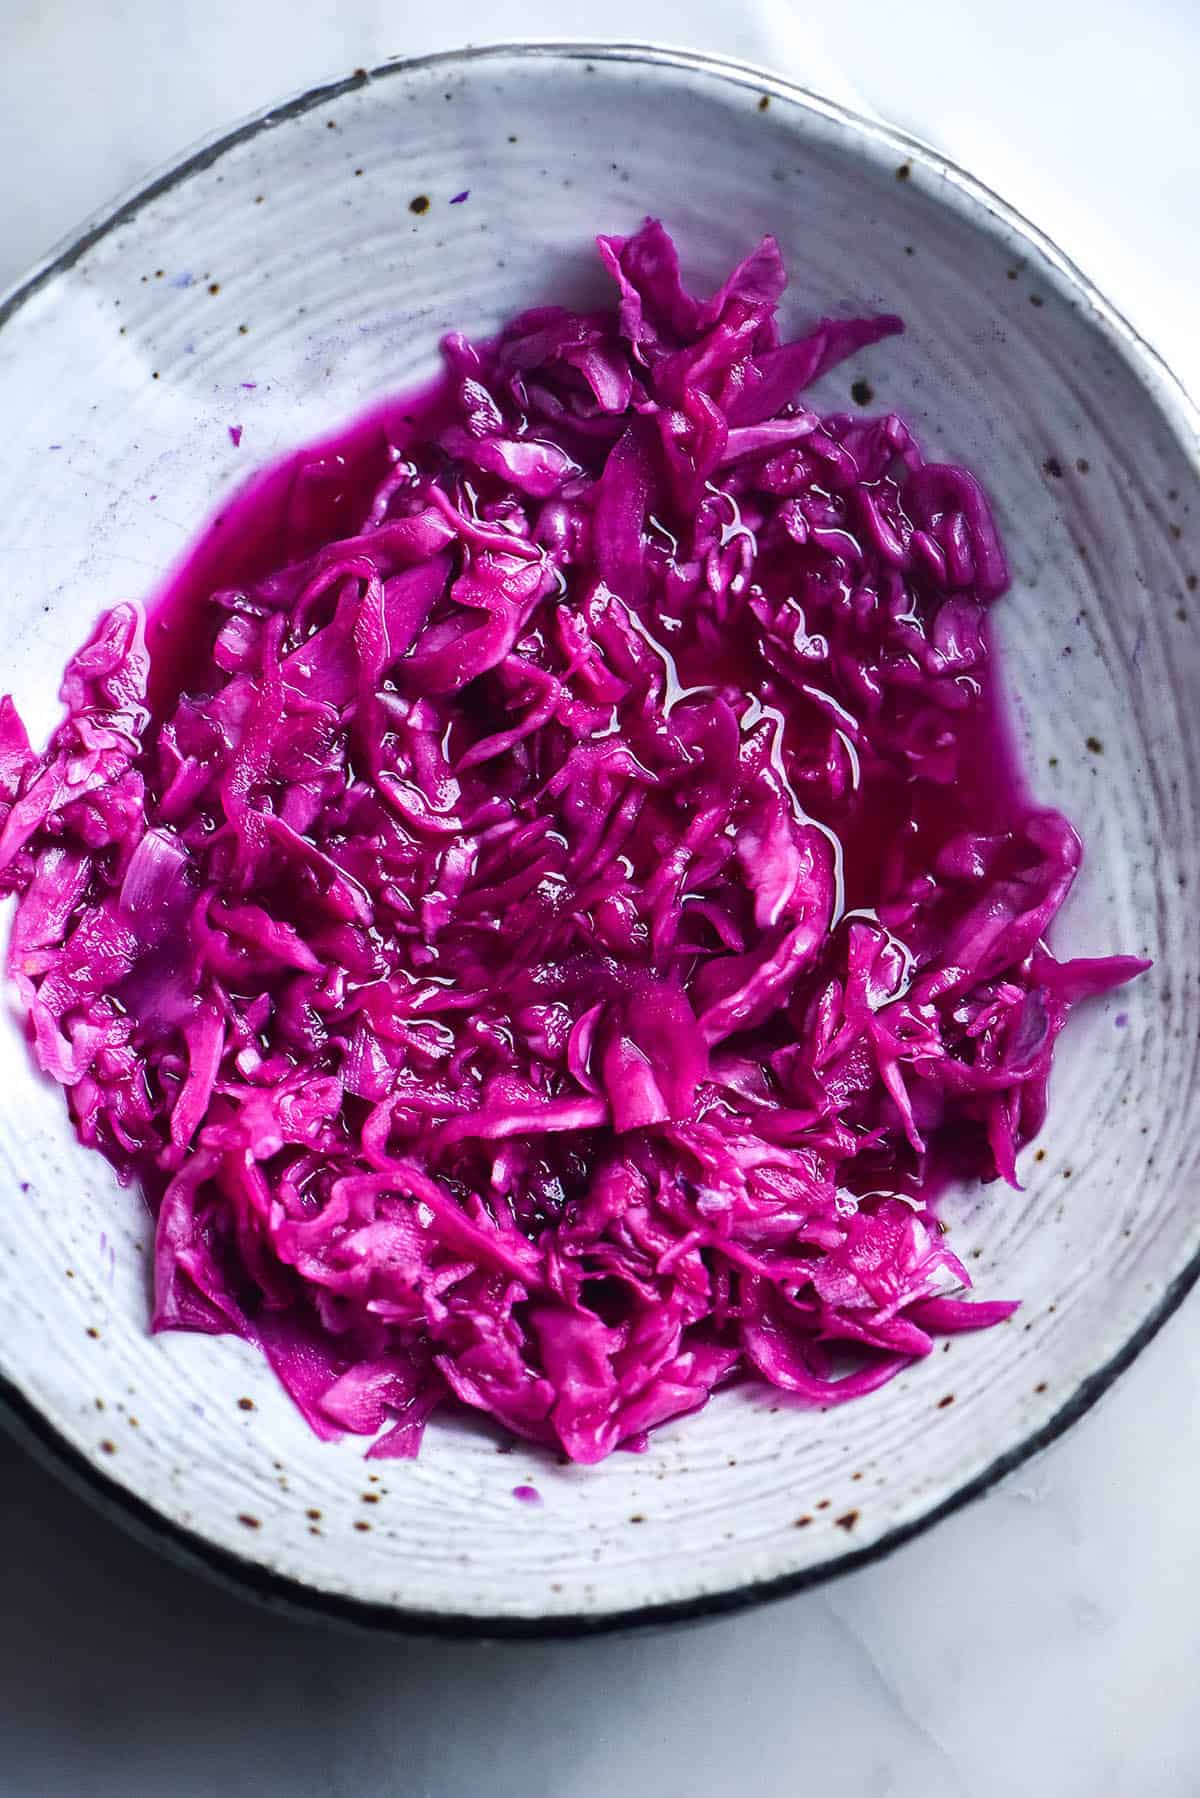 An aerial view of a white ceramic bowl filled with FODMAP friendly 'pickled red onion' in brine.